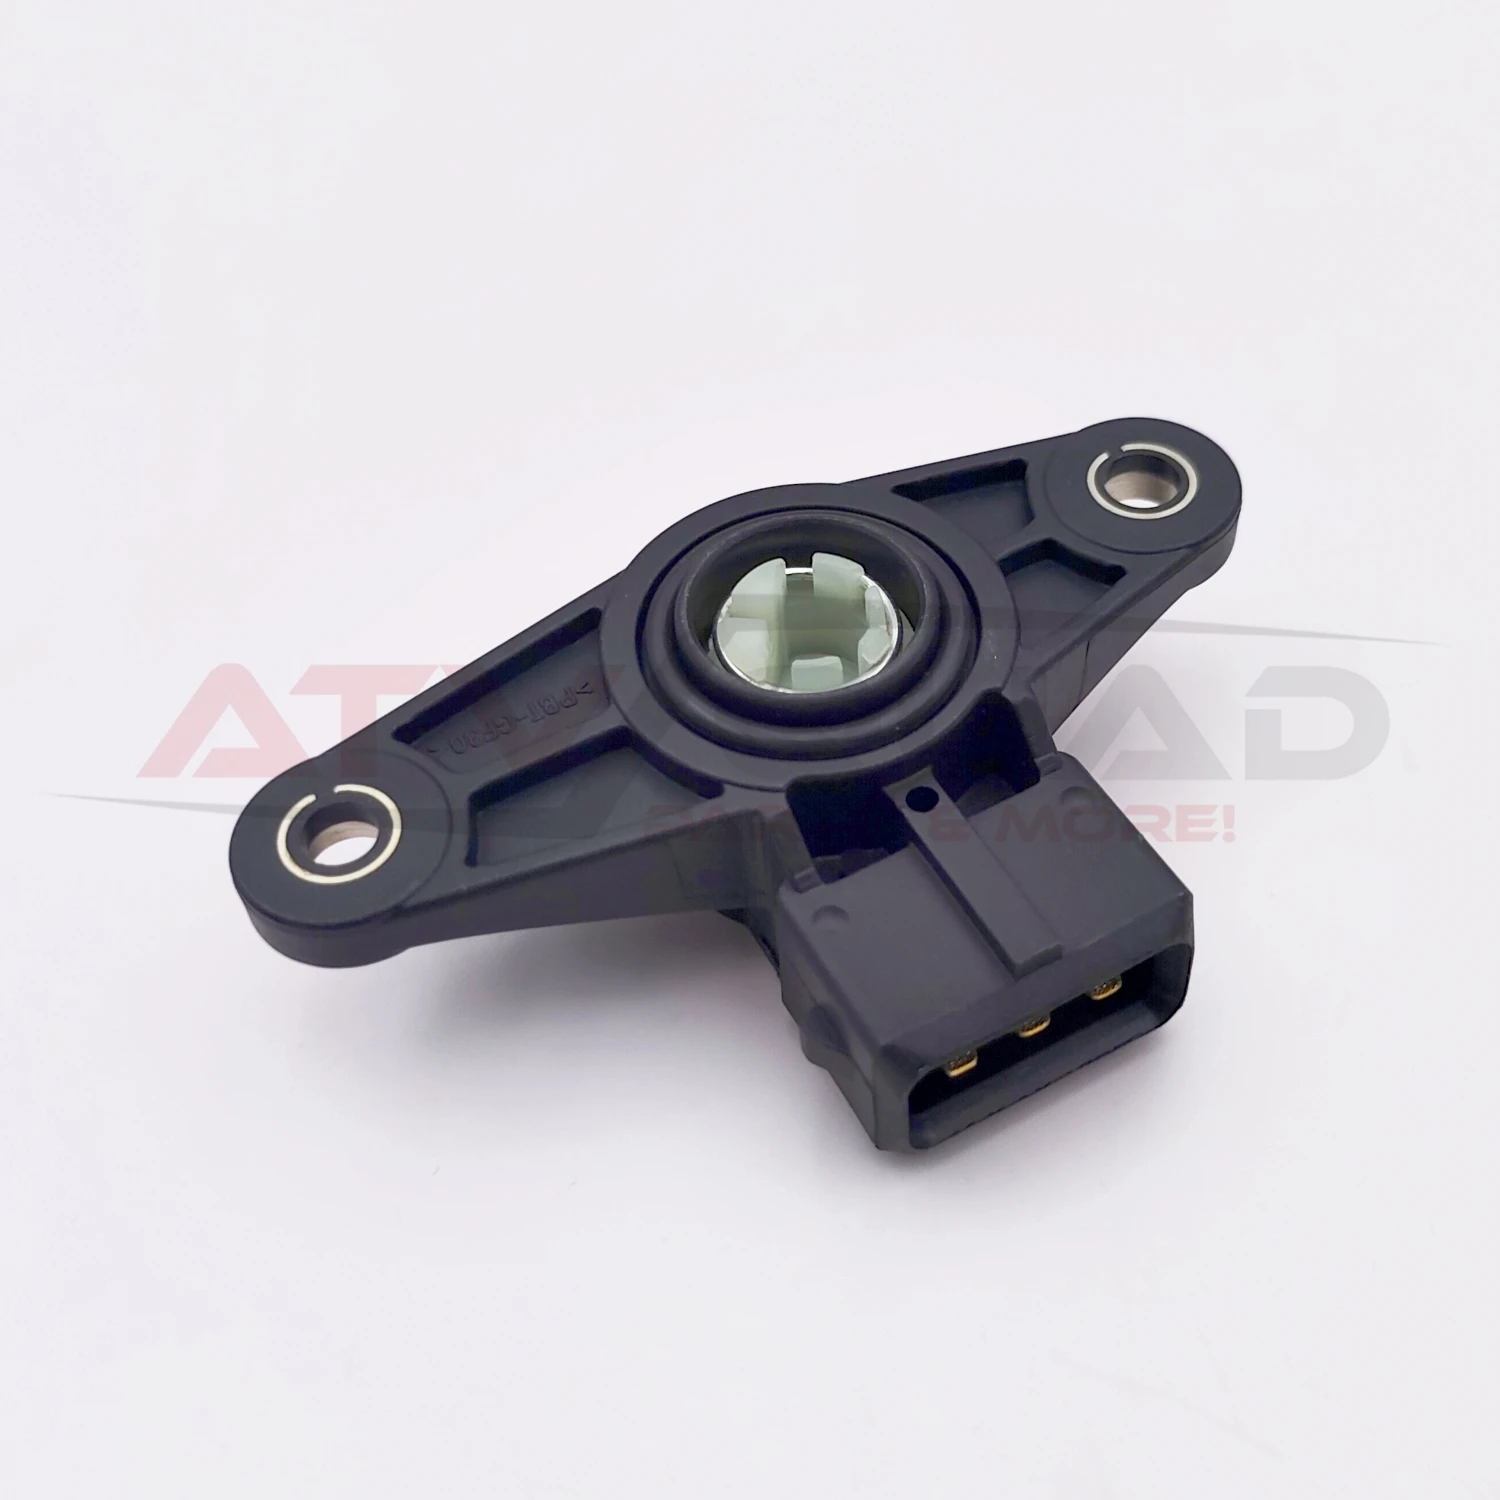 TPS Throttle Position Sensor for CFmoto 400NK 650NK 650MT 650GT Motorcycle 400 450 500S 520 600 Touring 625 ATV electronic control system motorcycle throttle gate position sensor applicable to everest zf125t 6 displacement device